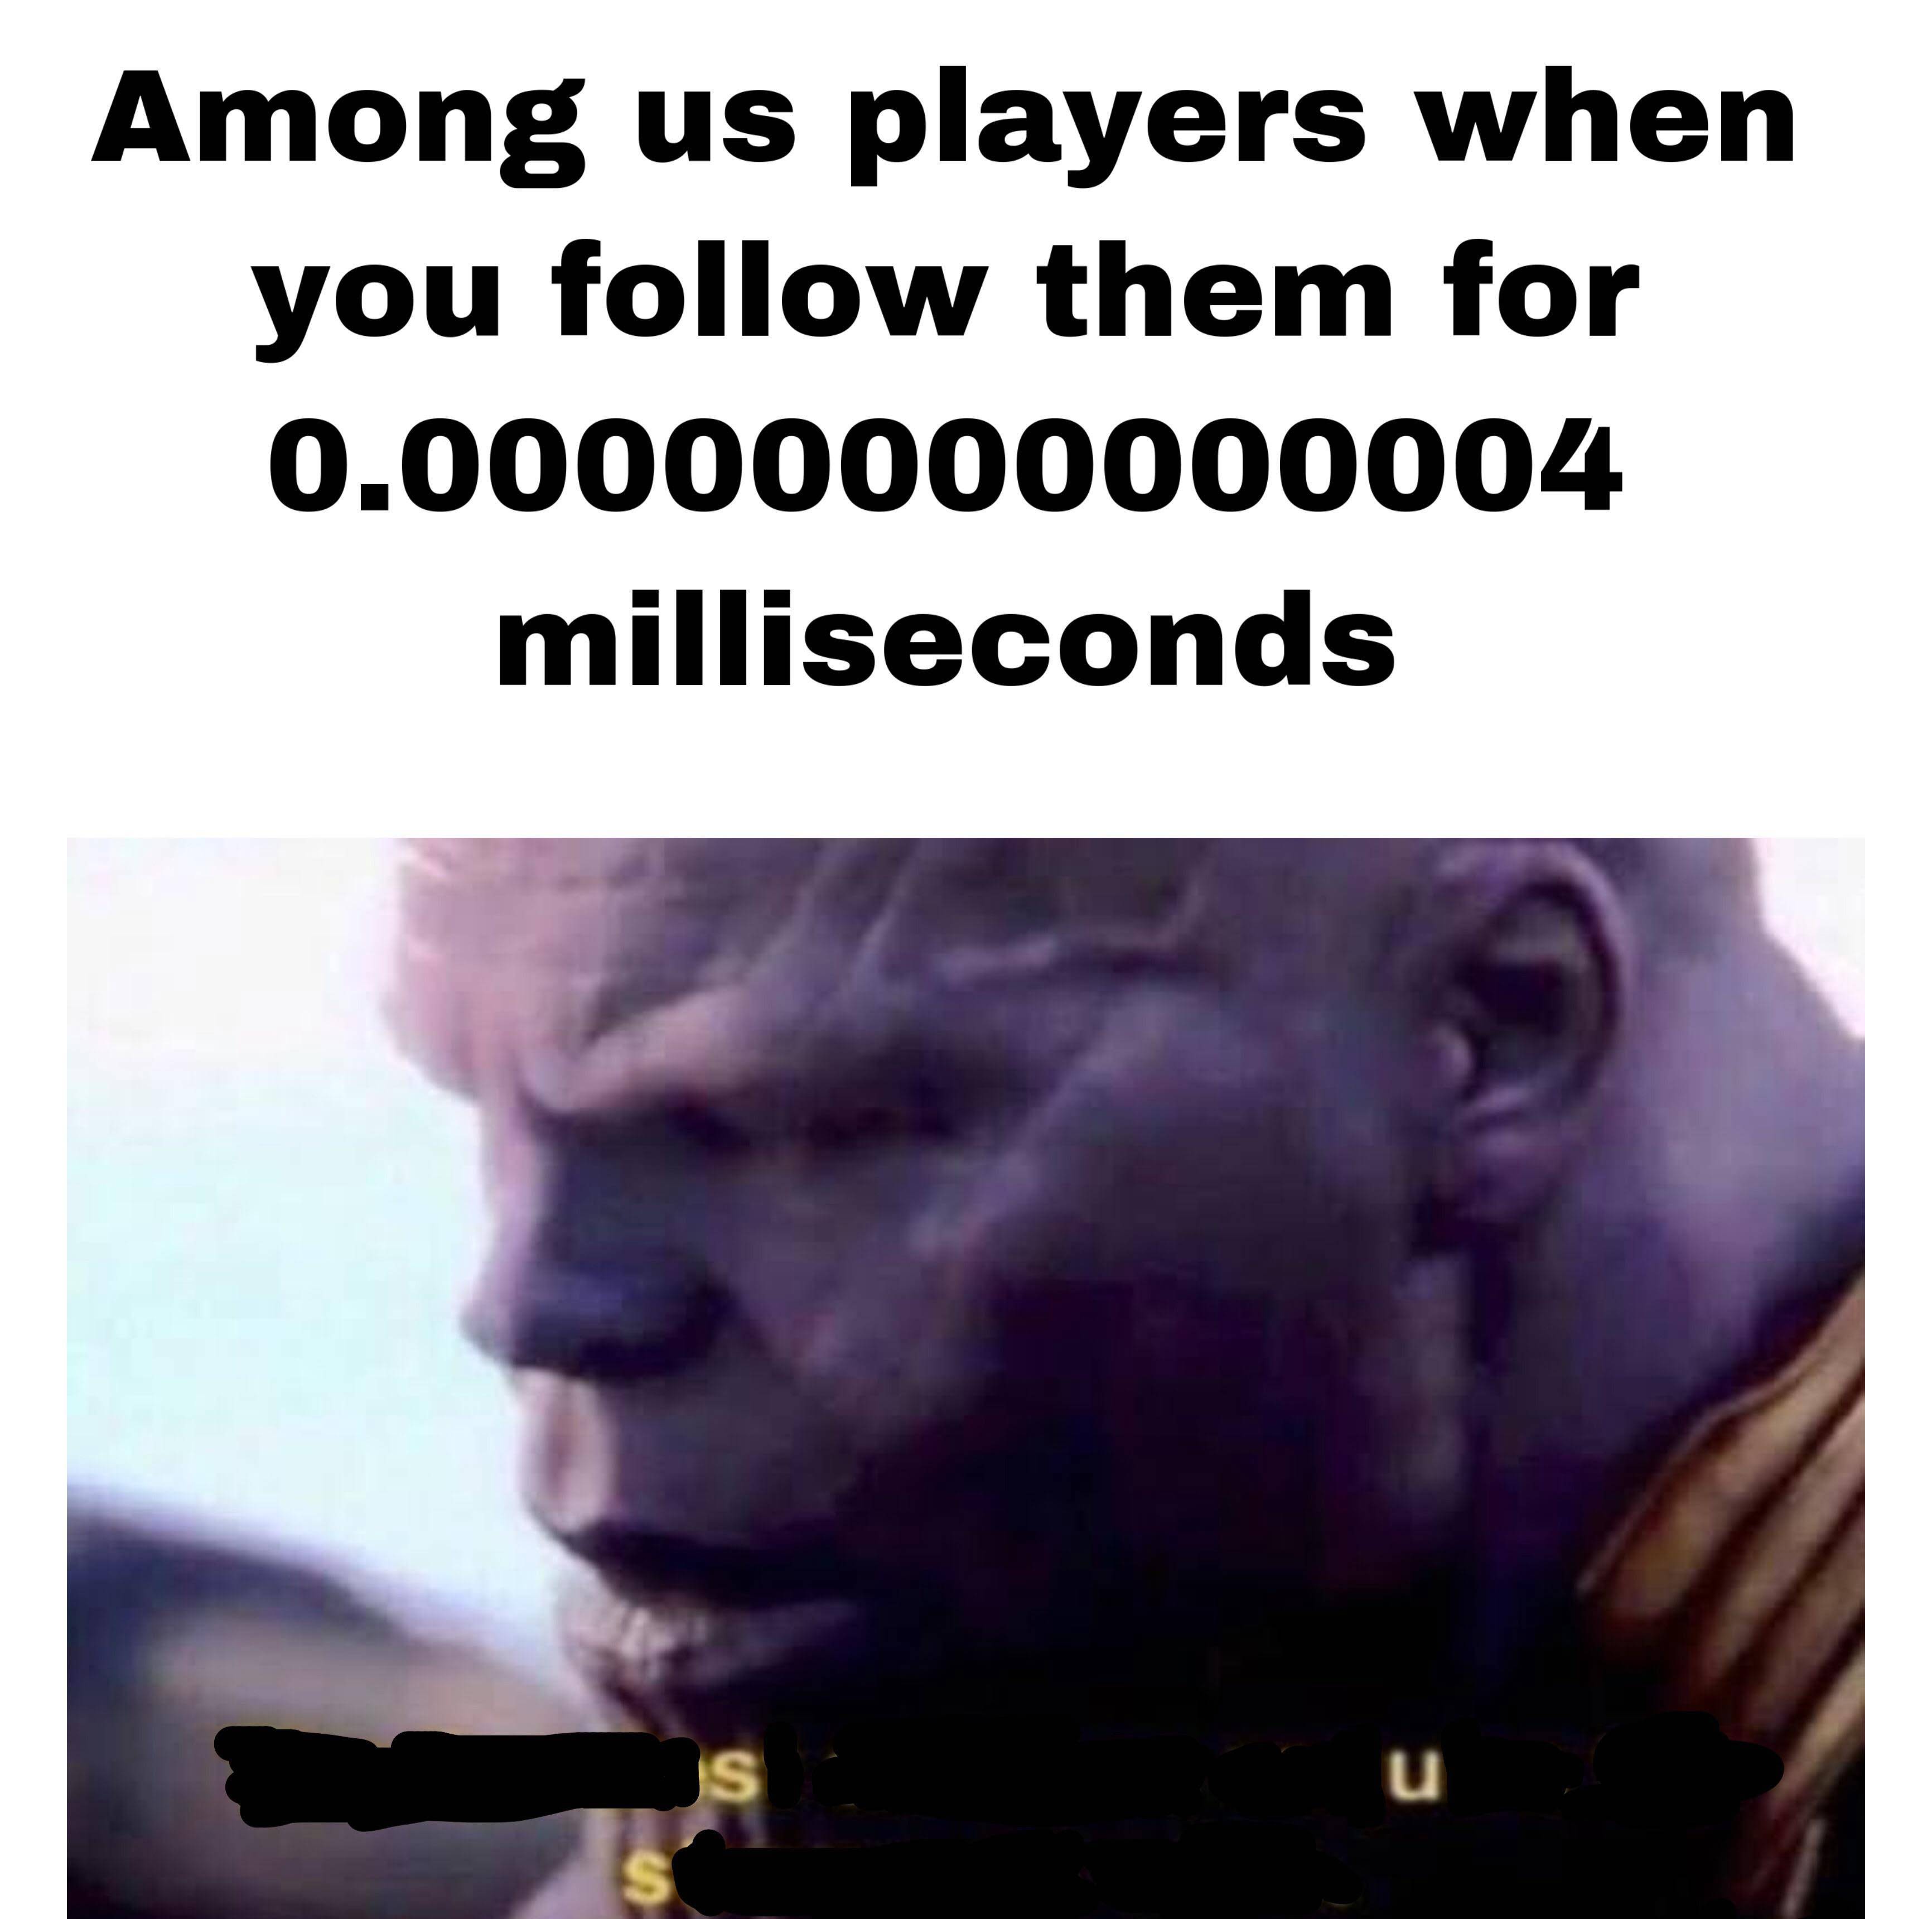 among us call memes - Among us players when you them for 0.00000000000004 milliseconds Is S